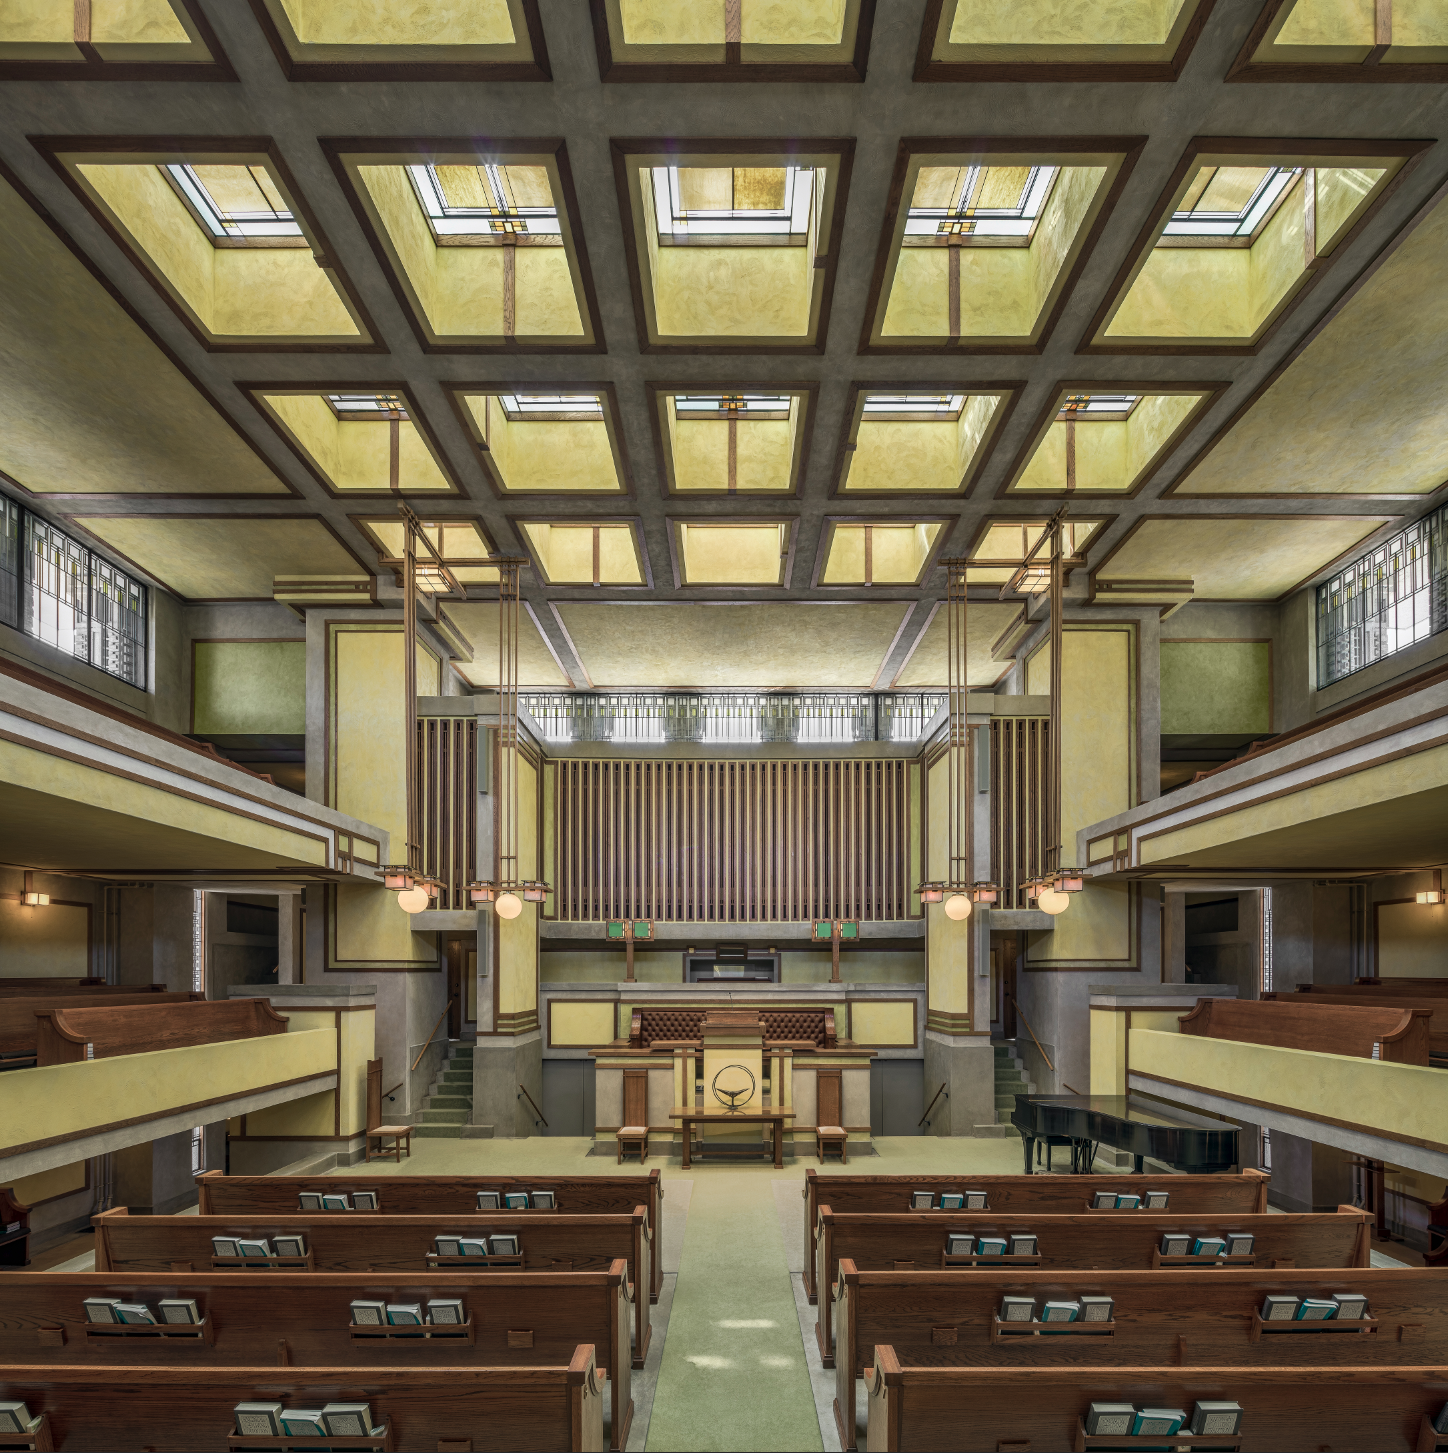 Frank Lloyd Wright’s Unity Temple To Be Restored